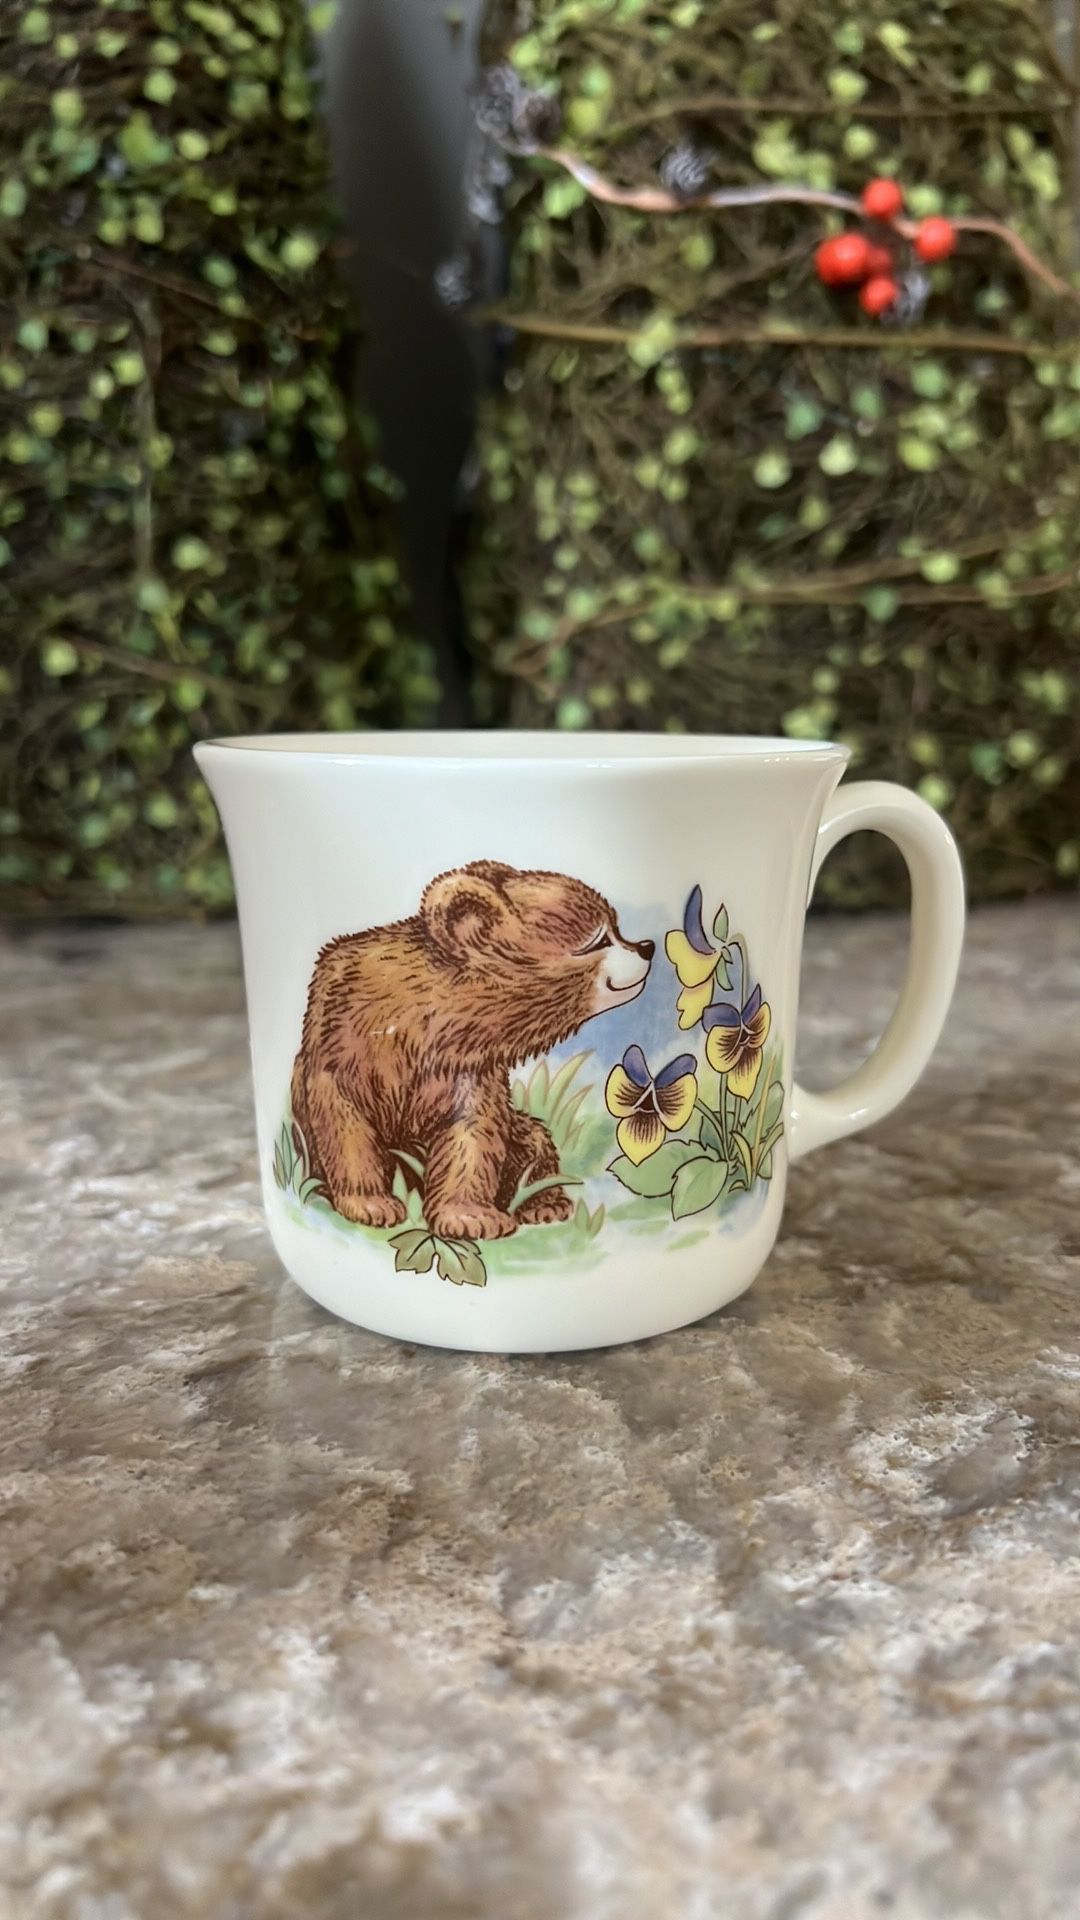 Vintage Royal Kent Bone China Child's Cup with Teddy Bear Staffordshire England